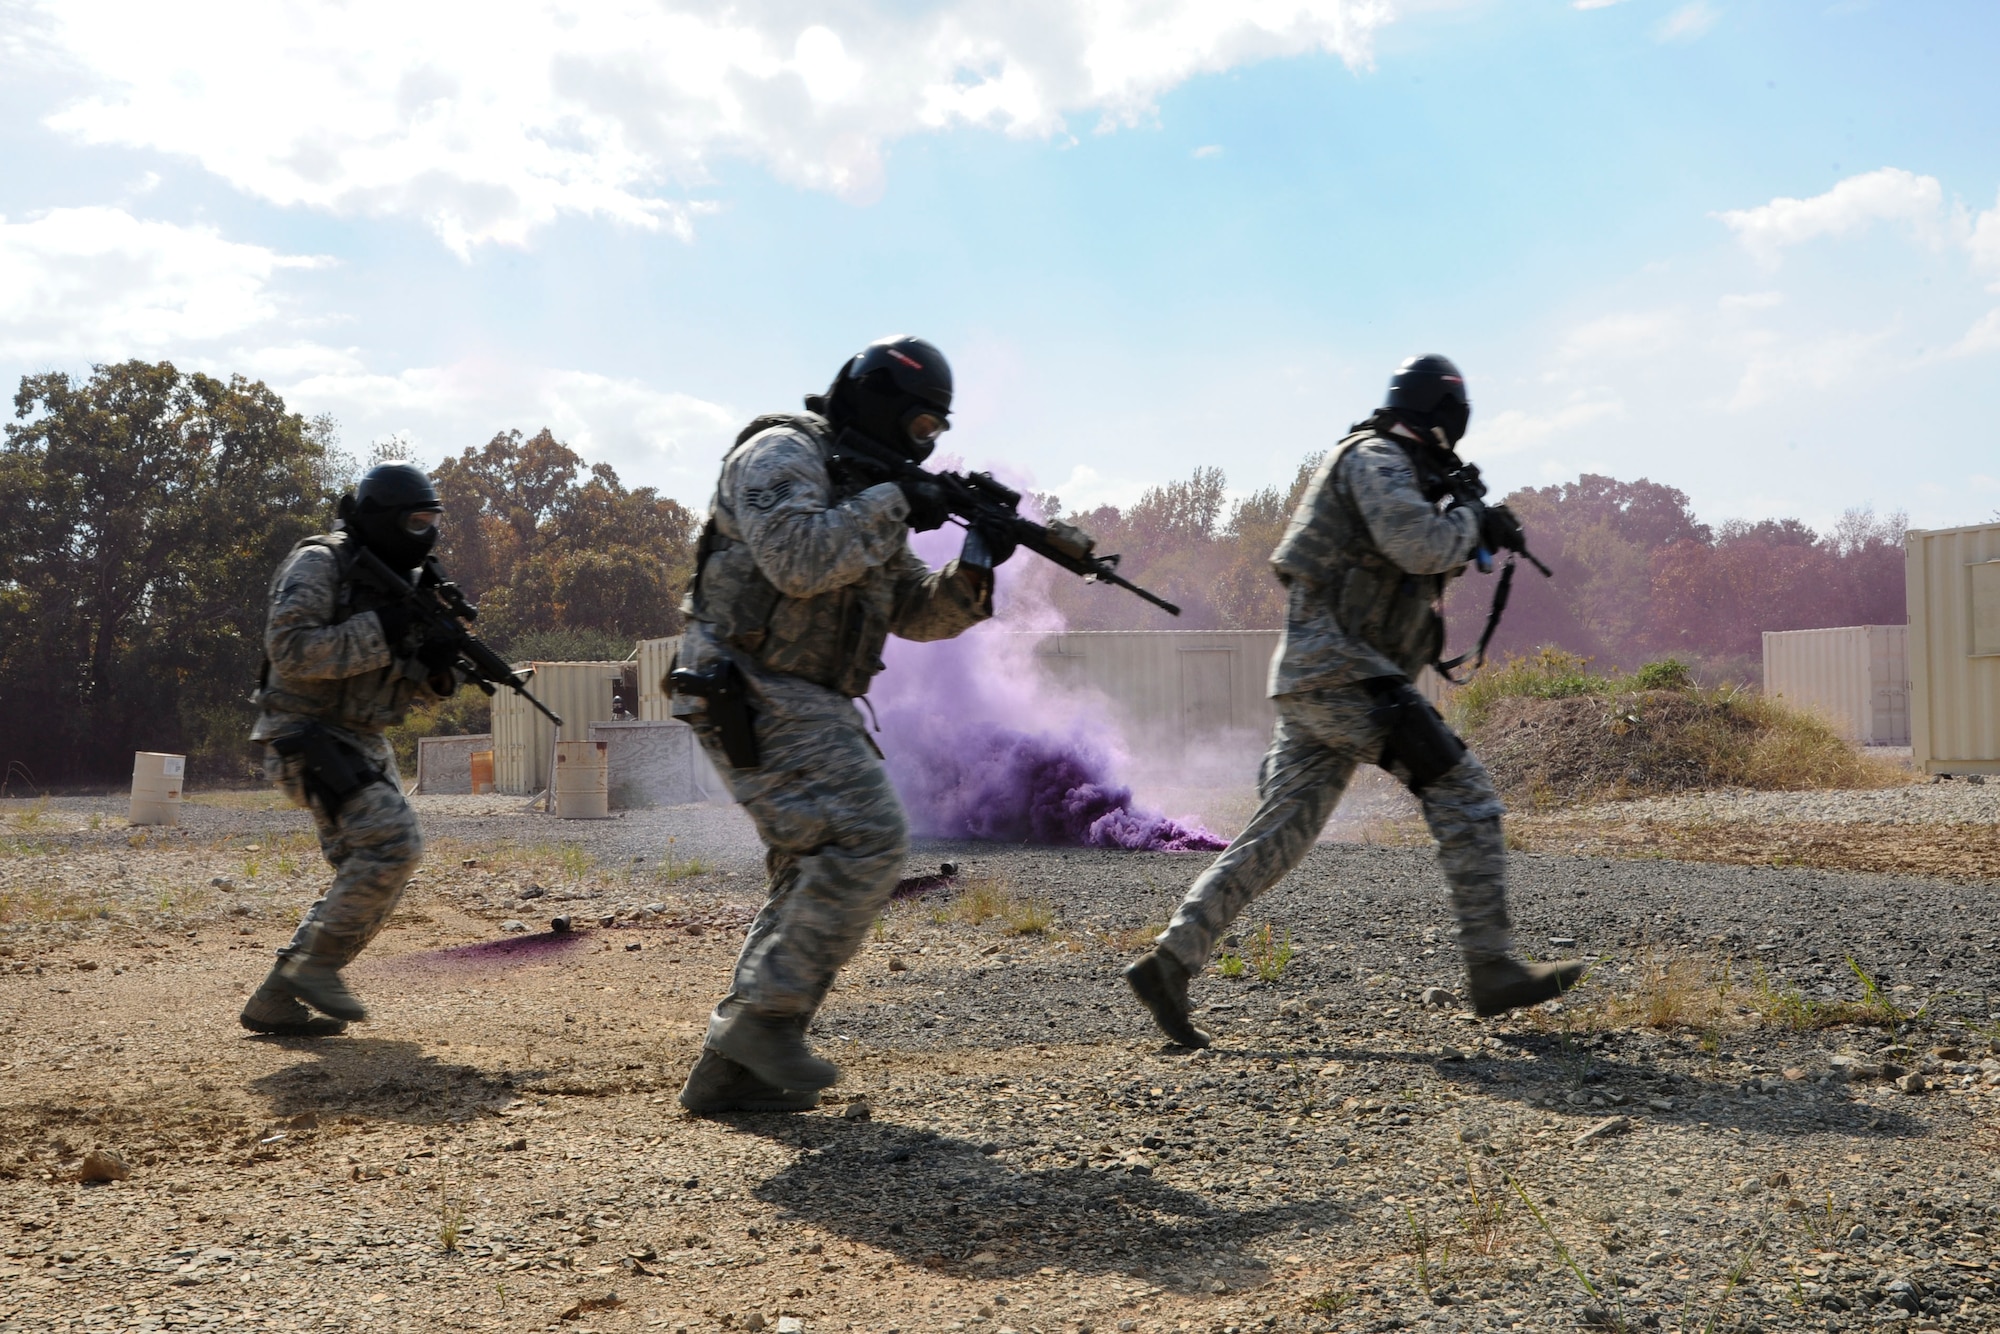 Defenders from the 19th Security Forces Squadron participate in force-on-force training Oct. 12, 2016, at Little Rock Air Force Base, Ark. Force-on-force training is an annual requirement to prepare security forces members for deployments and combat operations. (U.S. Air Force photo by Senior Airman Stephanie Serrano)